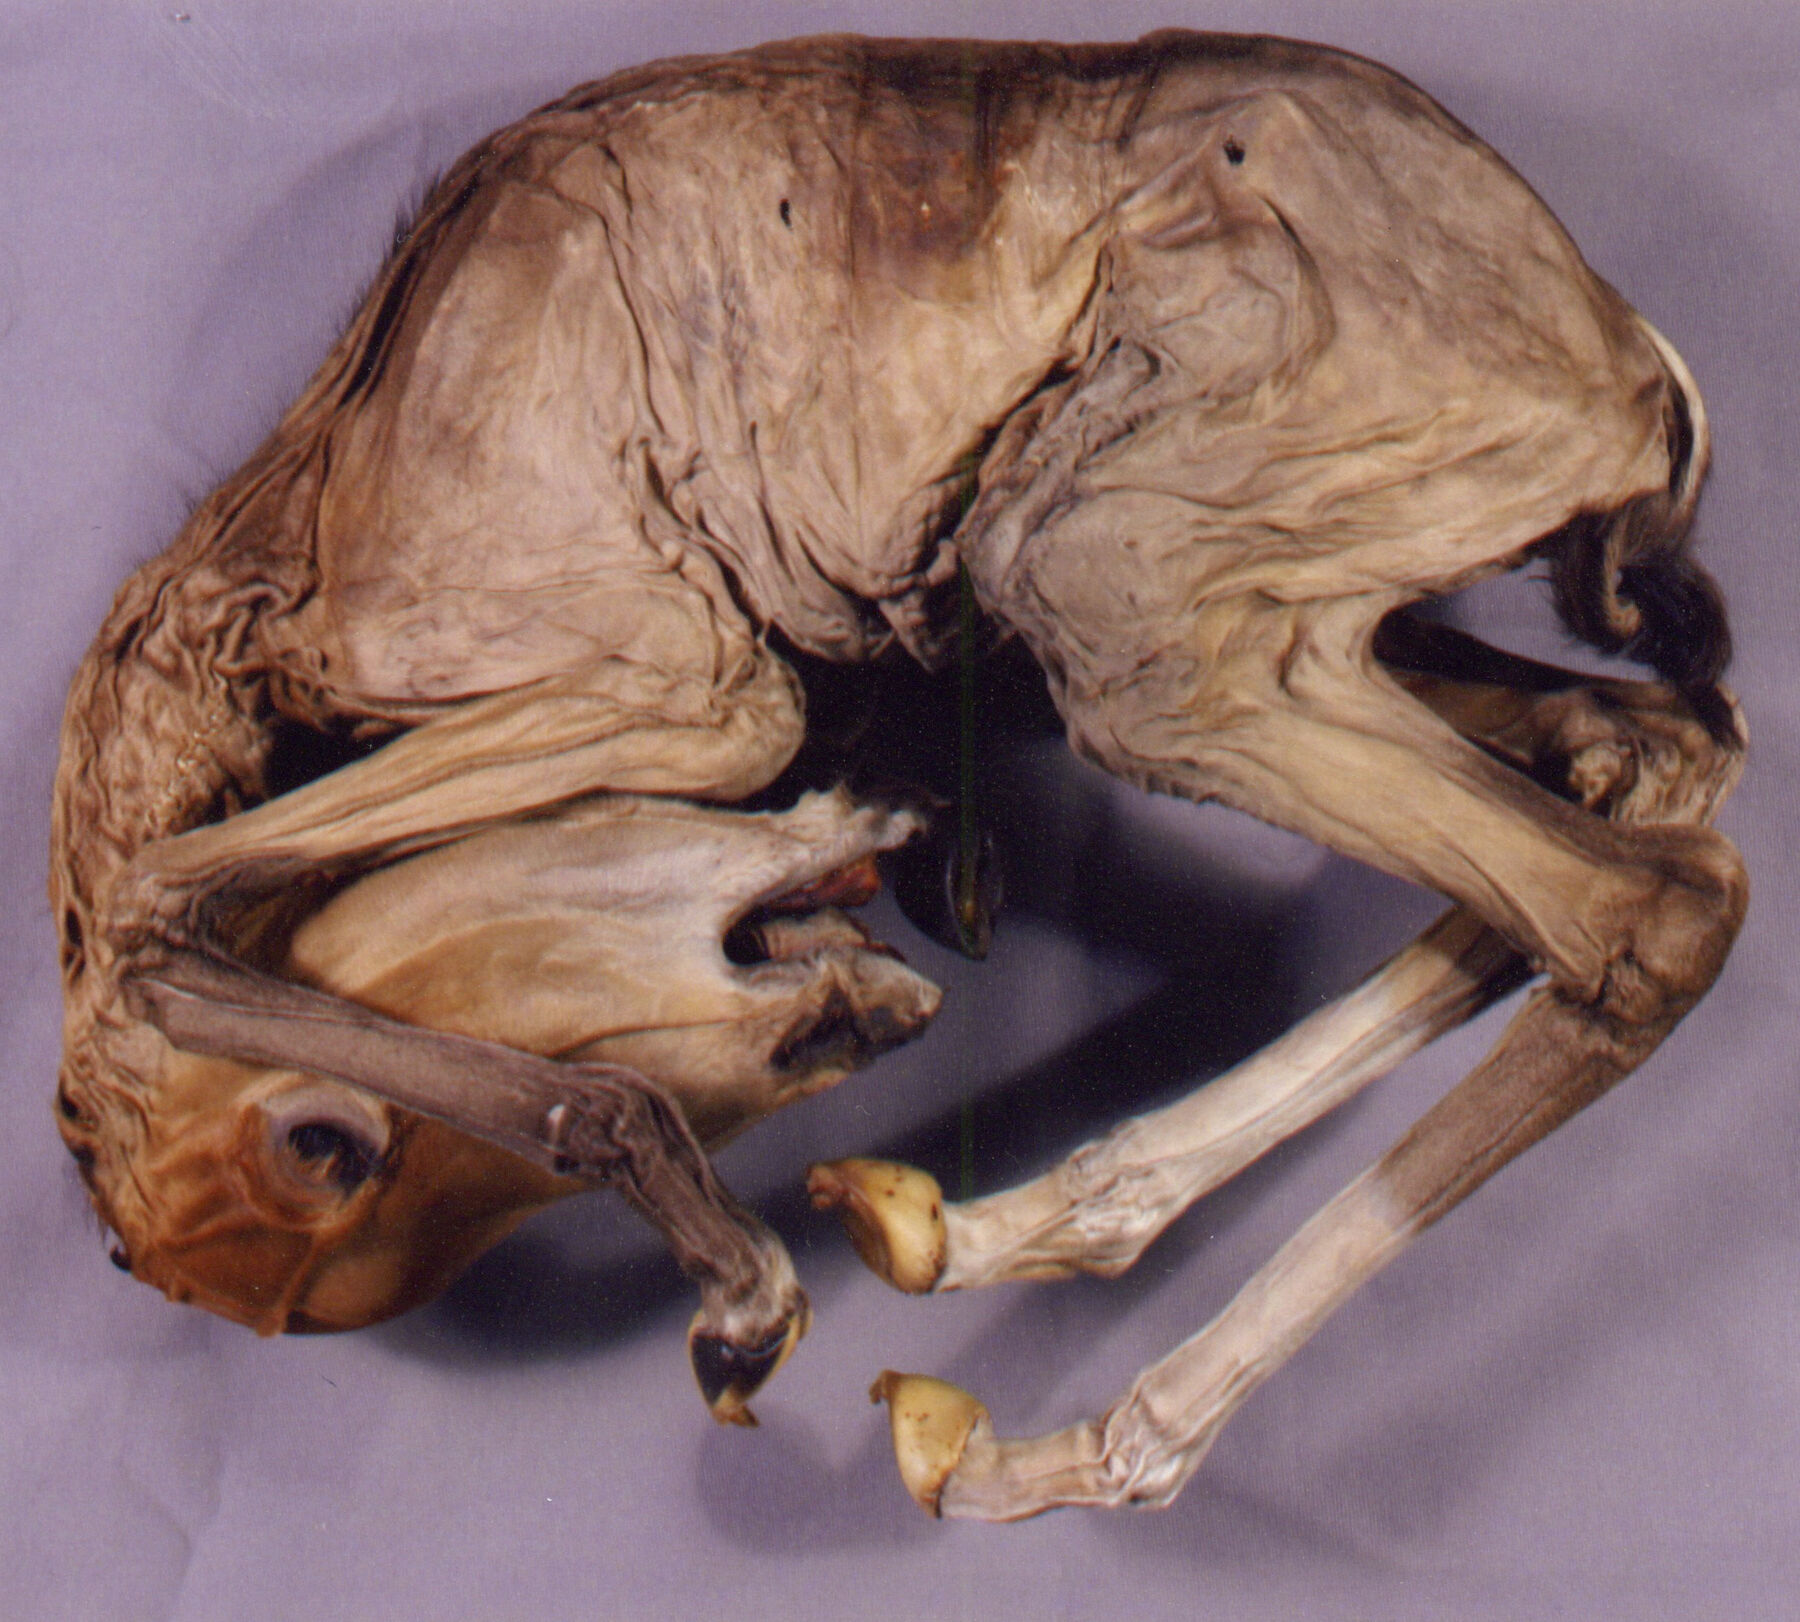 A curled-up dried mummified horse fetus